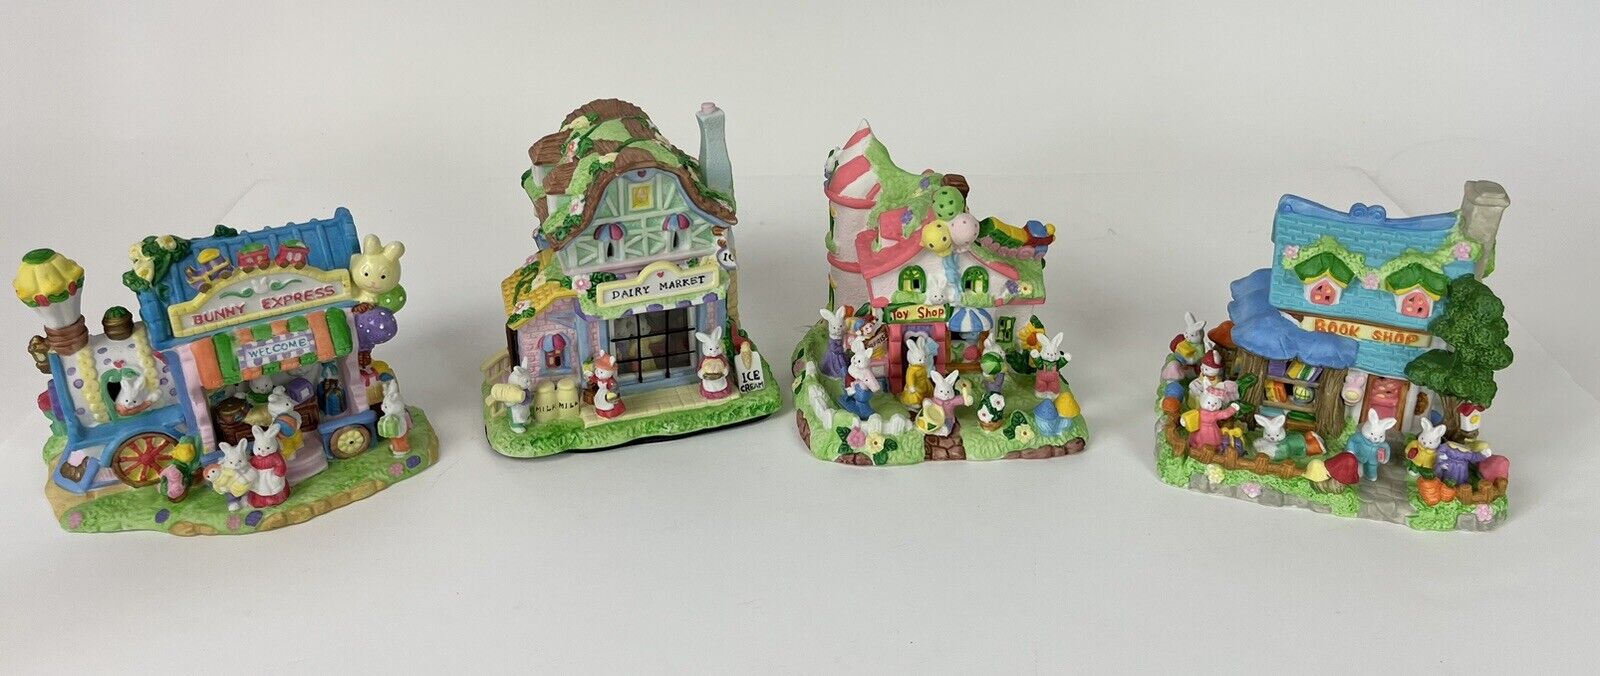 4 Cottontale Cottages Bunny Express, Dairy market, Toy Shop, Book Shop, Easter